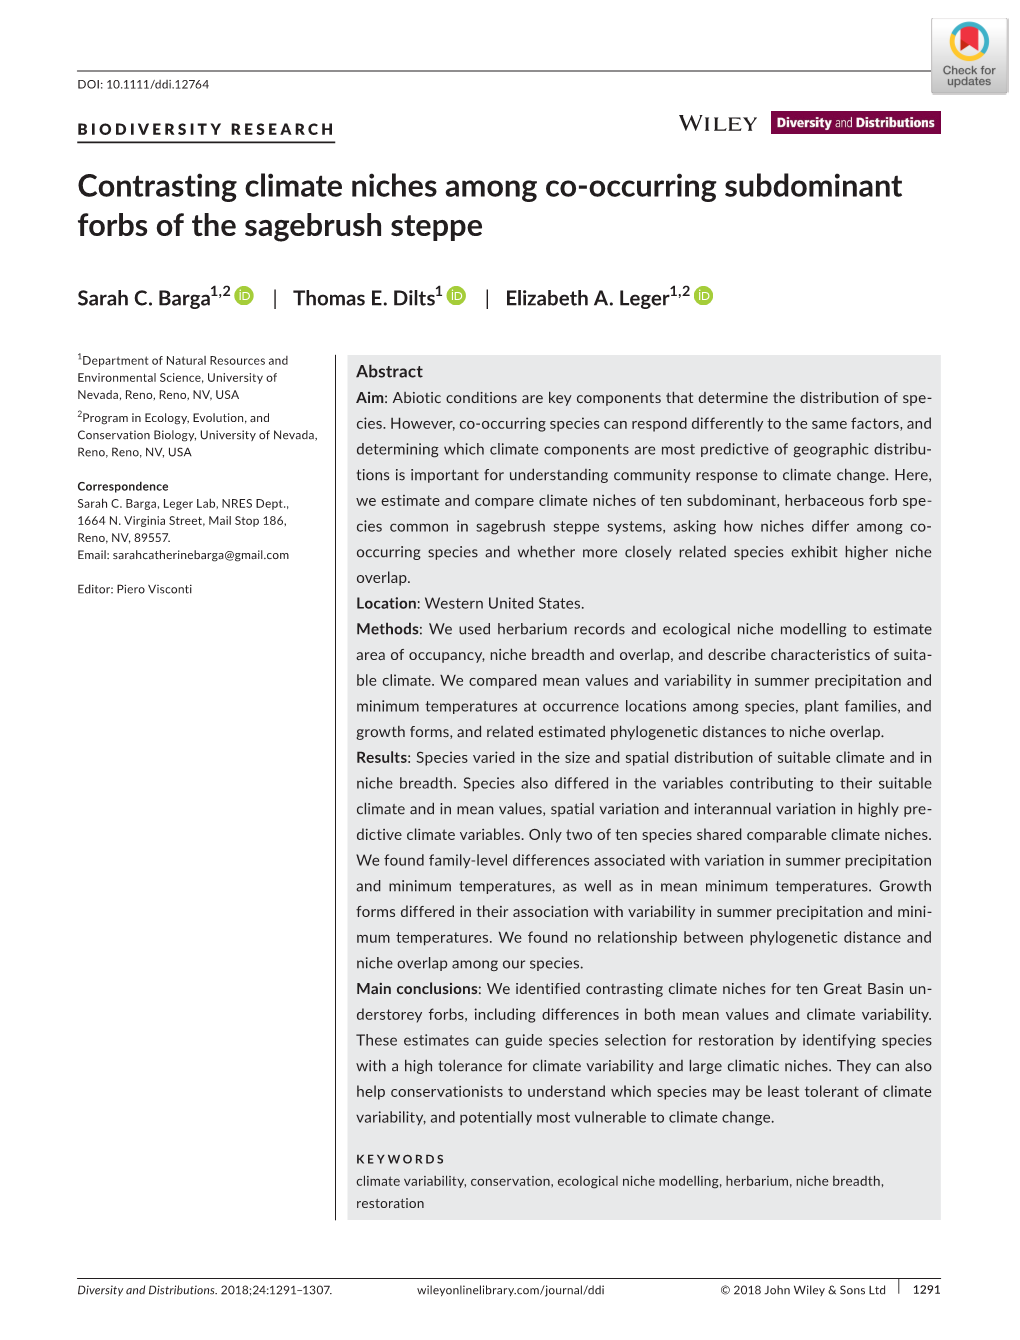 Contrasting Climate Niches Among Co-Occurring Subdominant Forbs Of